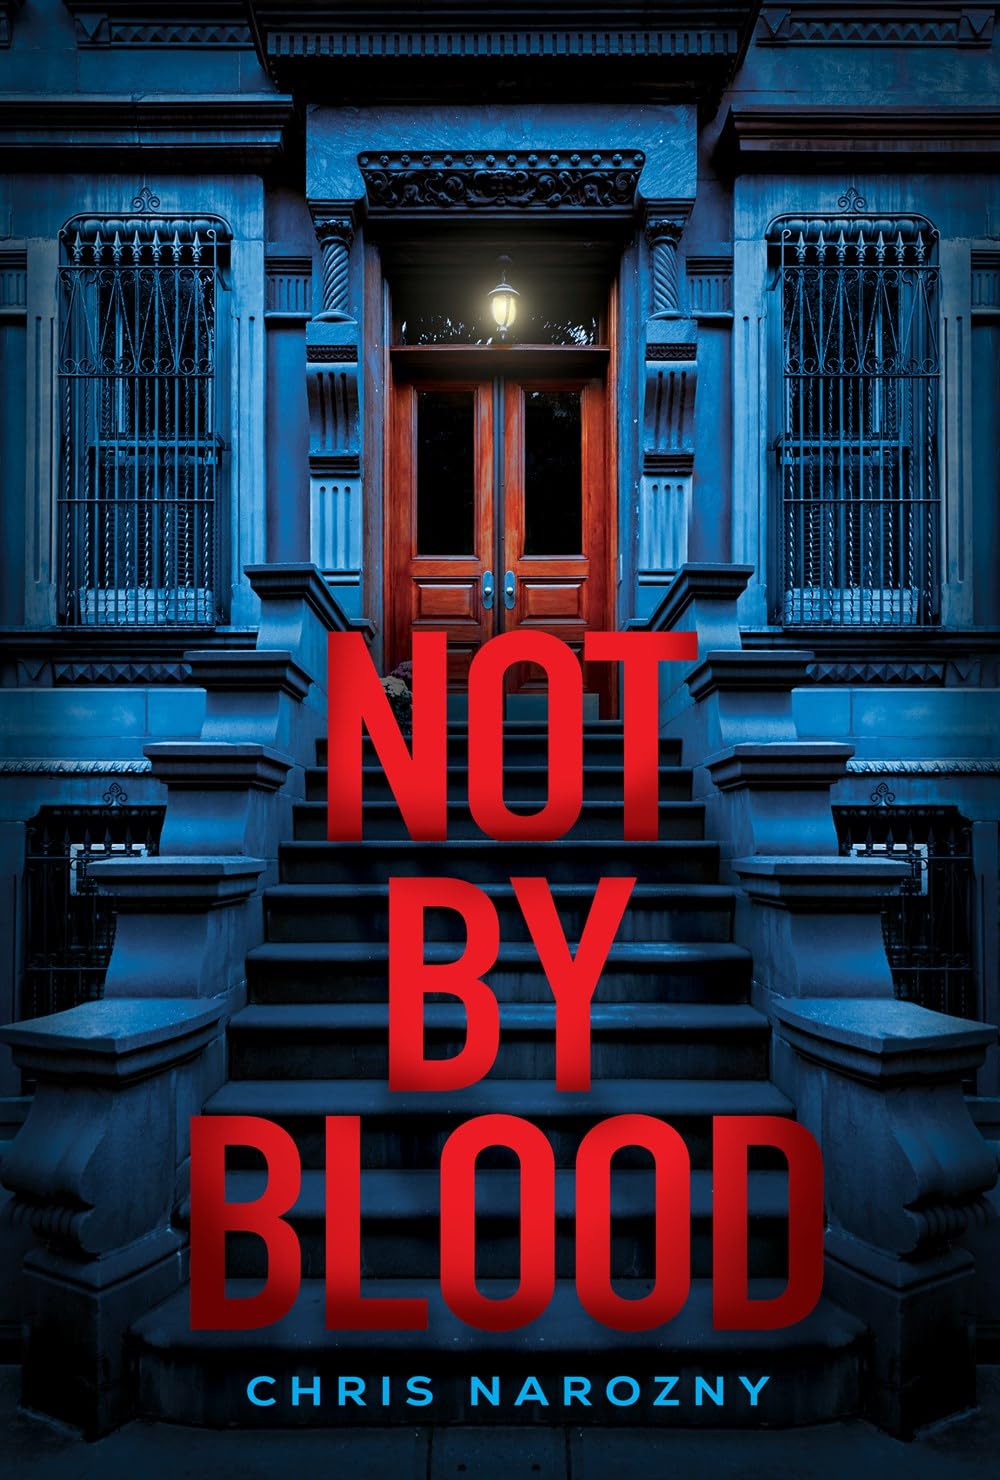 Not by Blood: A Thriller